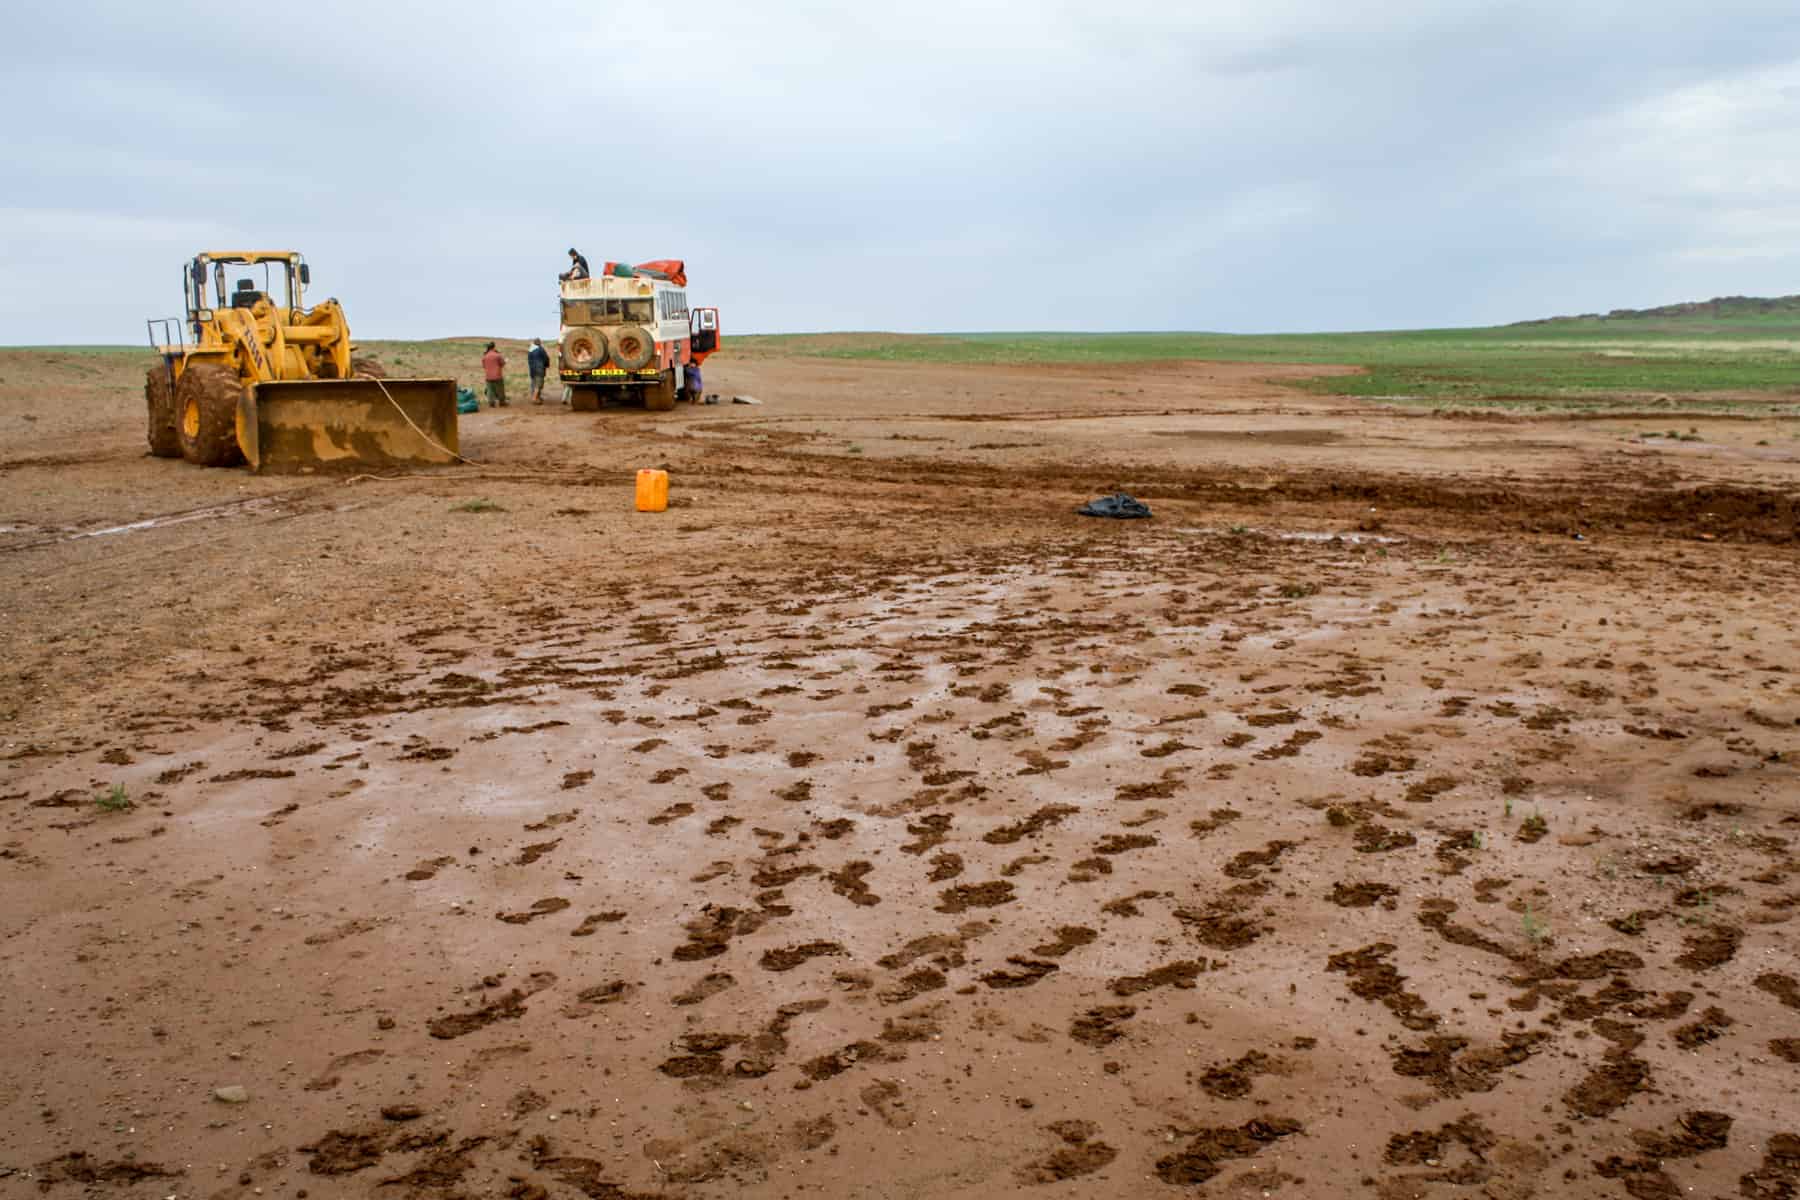 Tractors help pull the overlanding truck out of the sticky mud in Mongolia's rural landscape